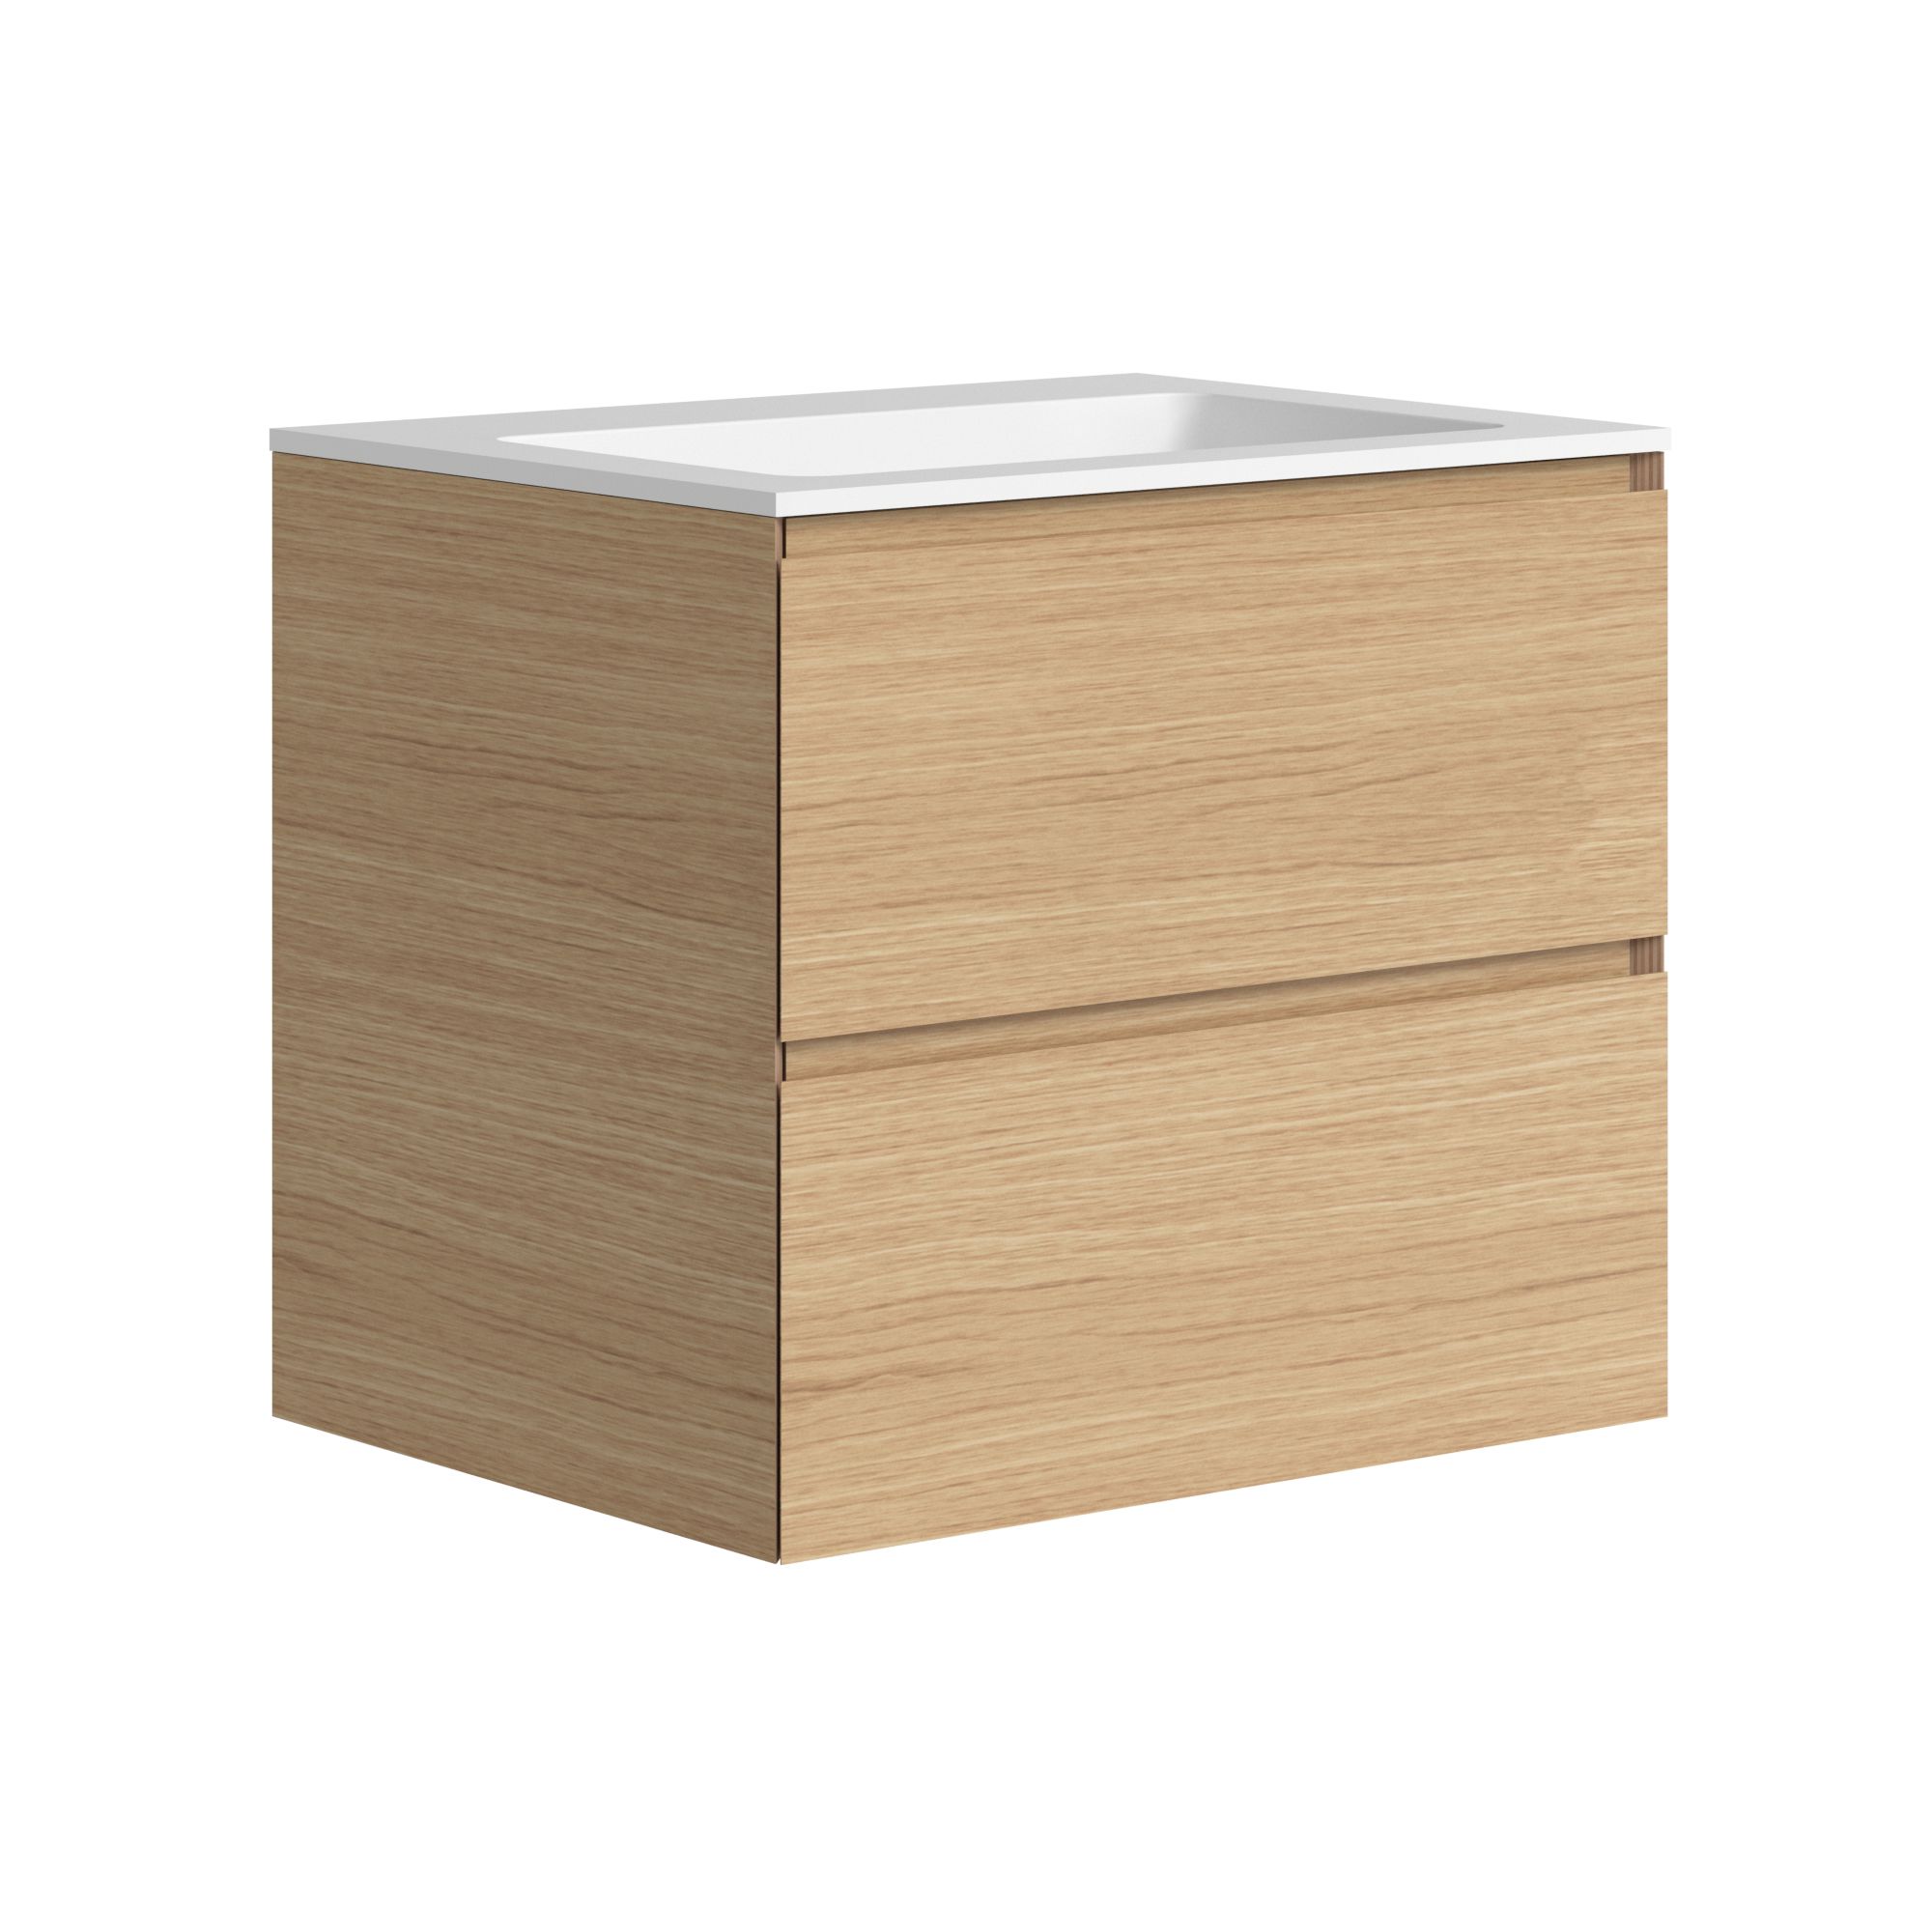 The Ellery Washbasin Pull Open Unit 600x520mm with Integrated Basin